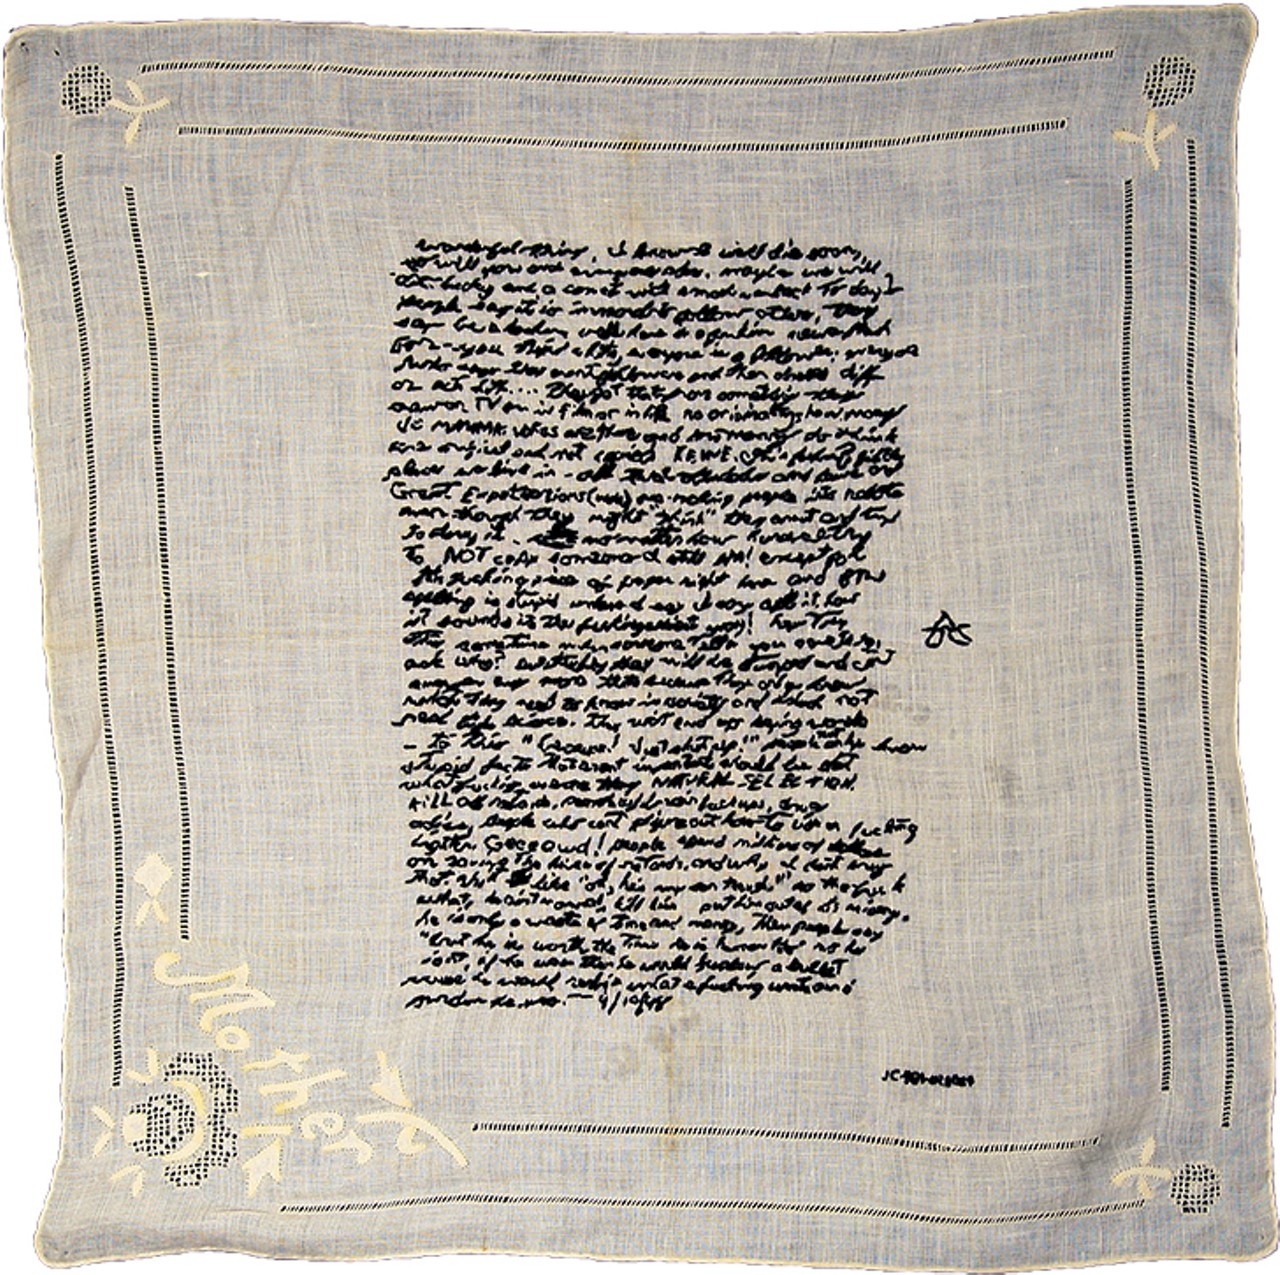 Through Aug. 14Florida Prize in Contemporary Art 2016 at Orlando Museum of Art&#147;Love Letters/White Flag: The Book of God (detail)&#148; by Noelle Mason, 2009-2016, hand-embroidered white handkerchief